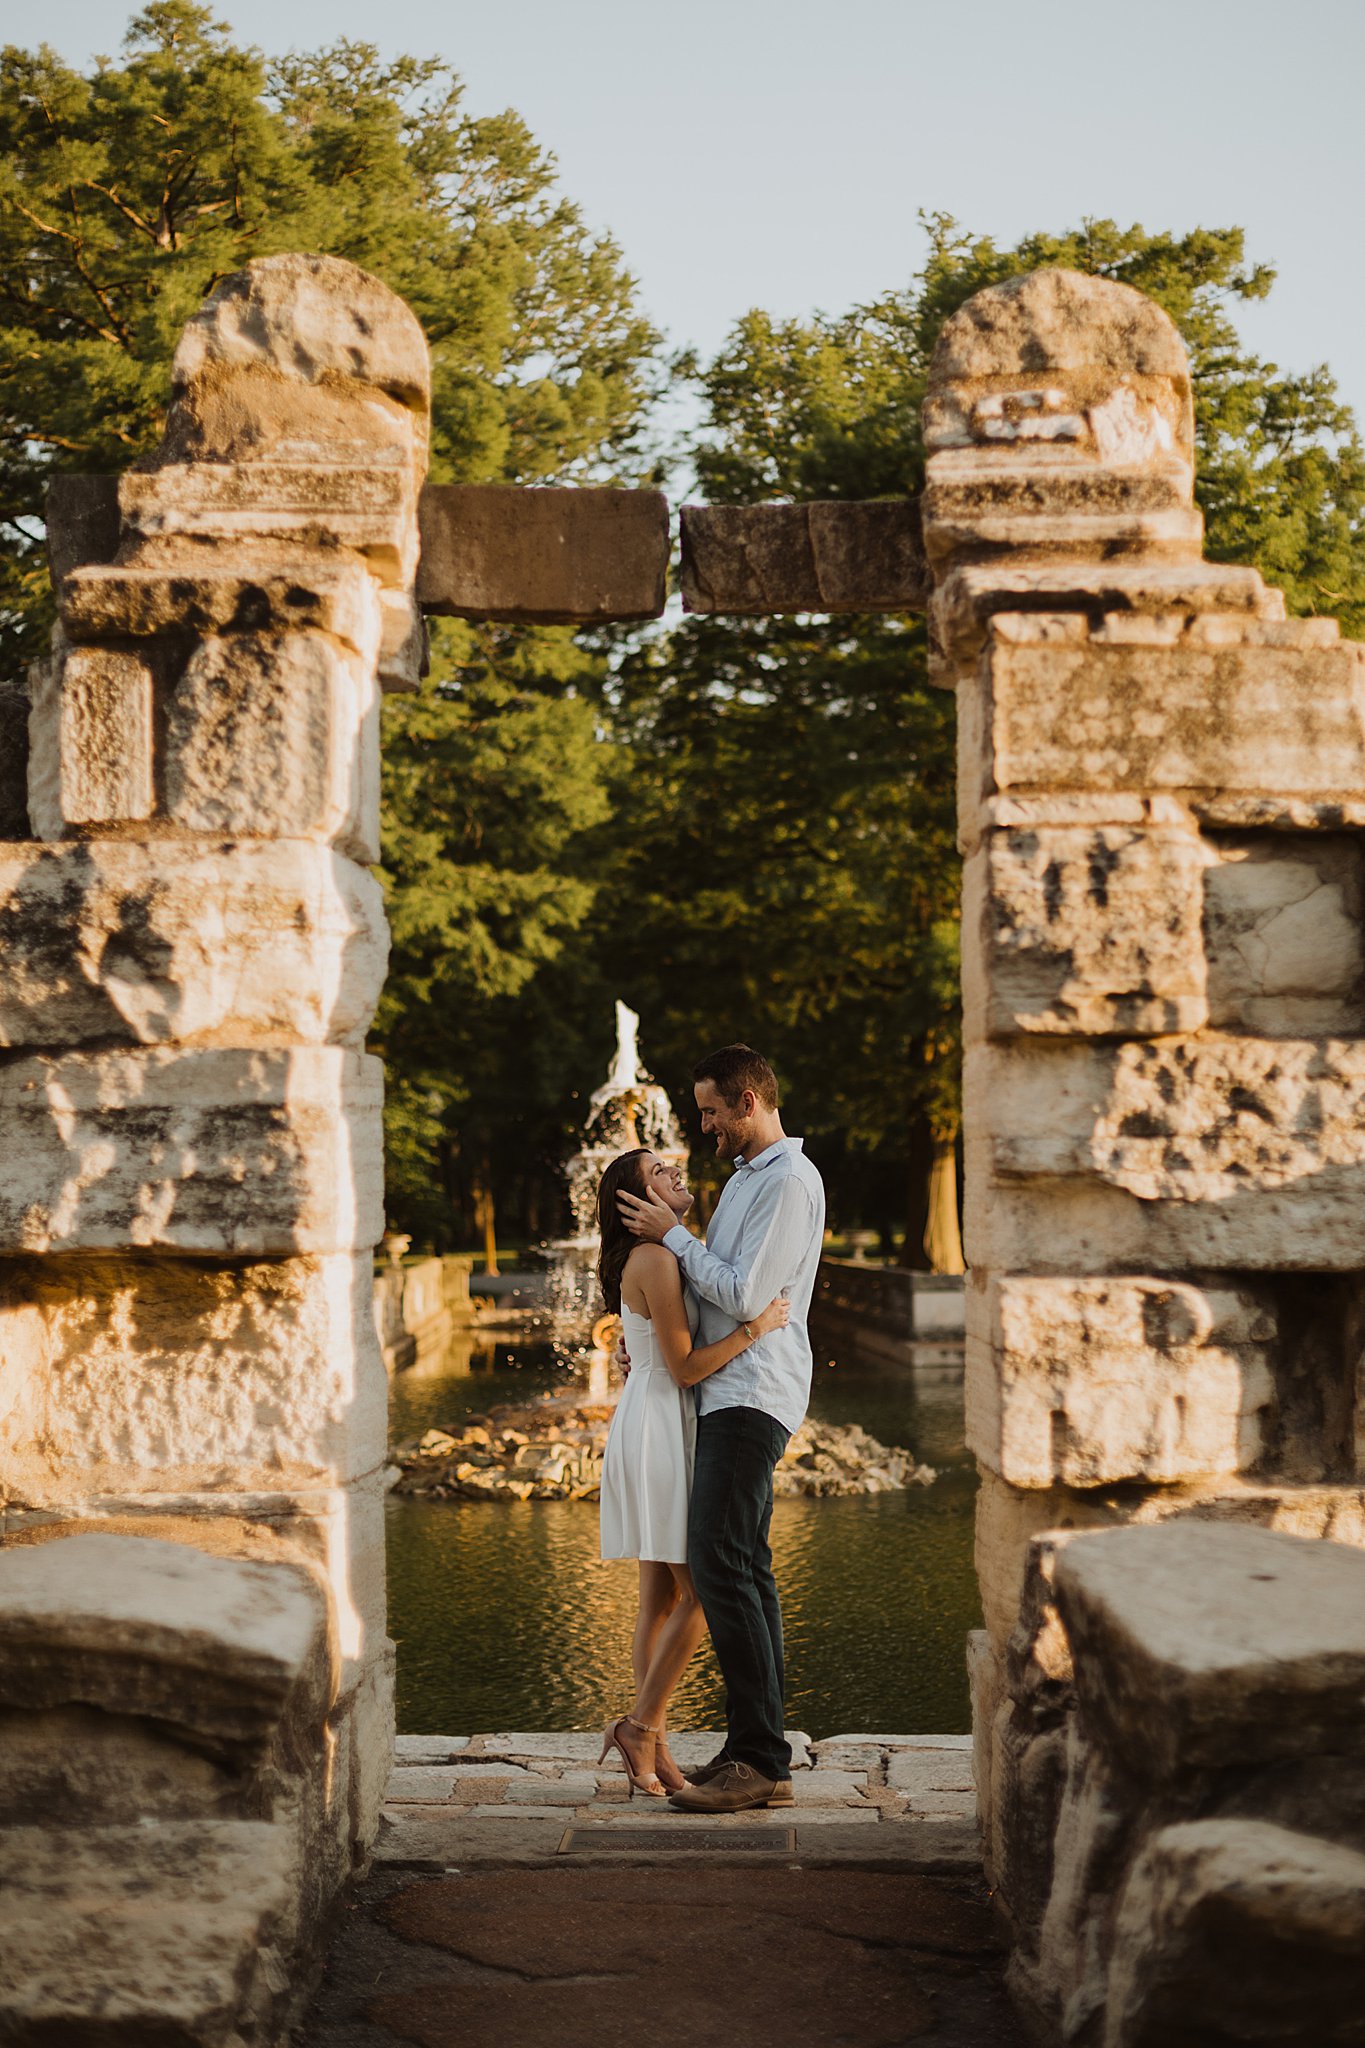 Couple standing together at The Ruins in Tower Grove